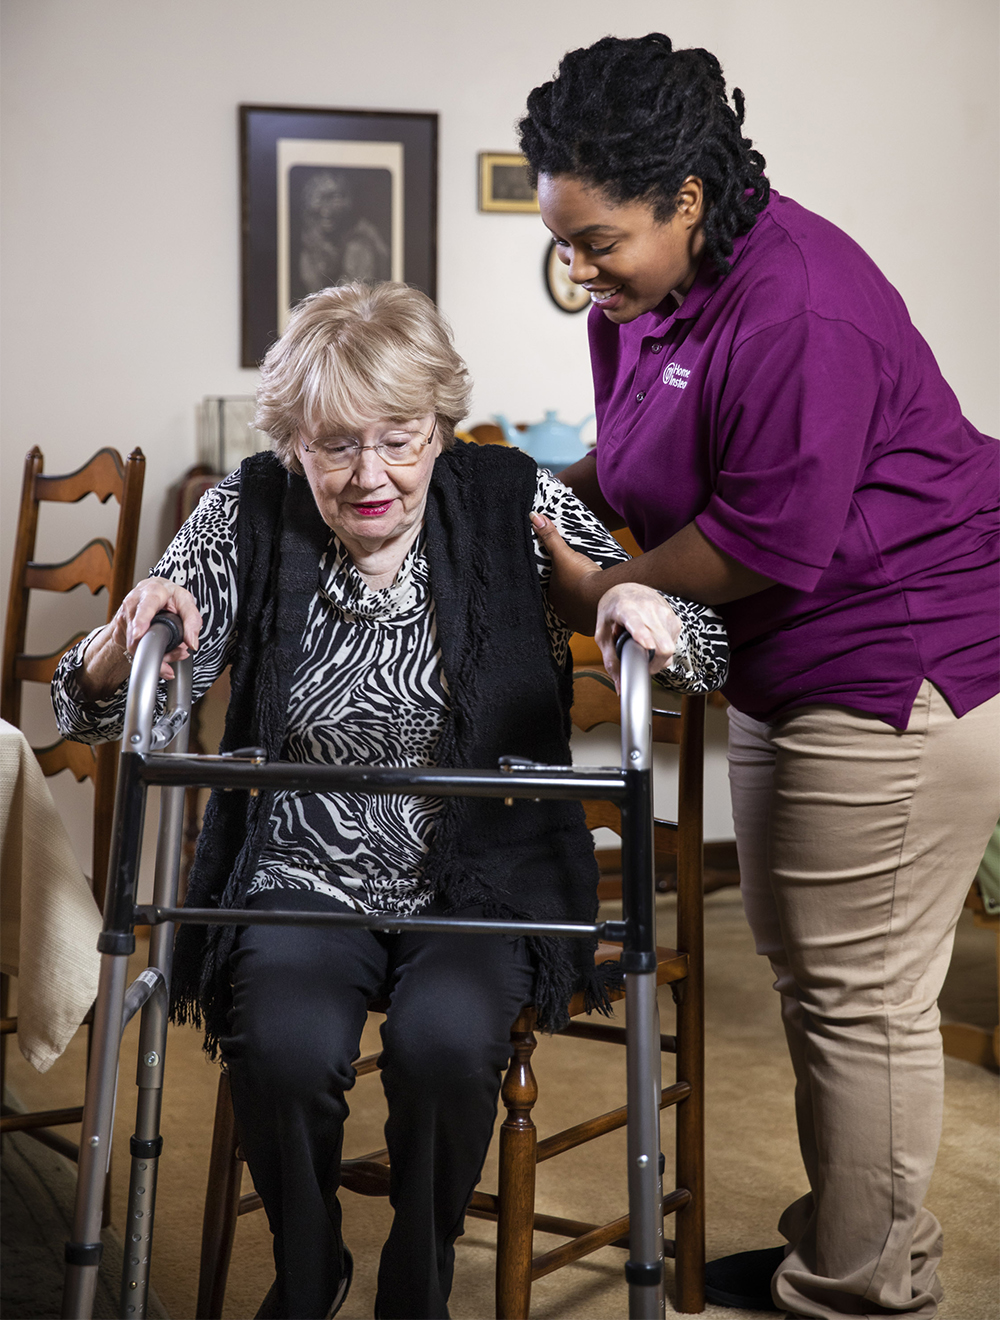 Home care can help speed up your recovery time